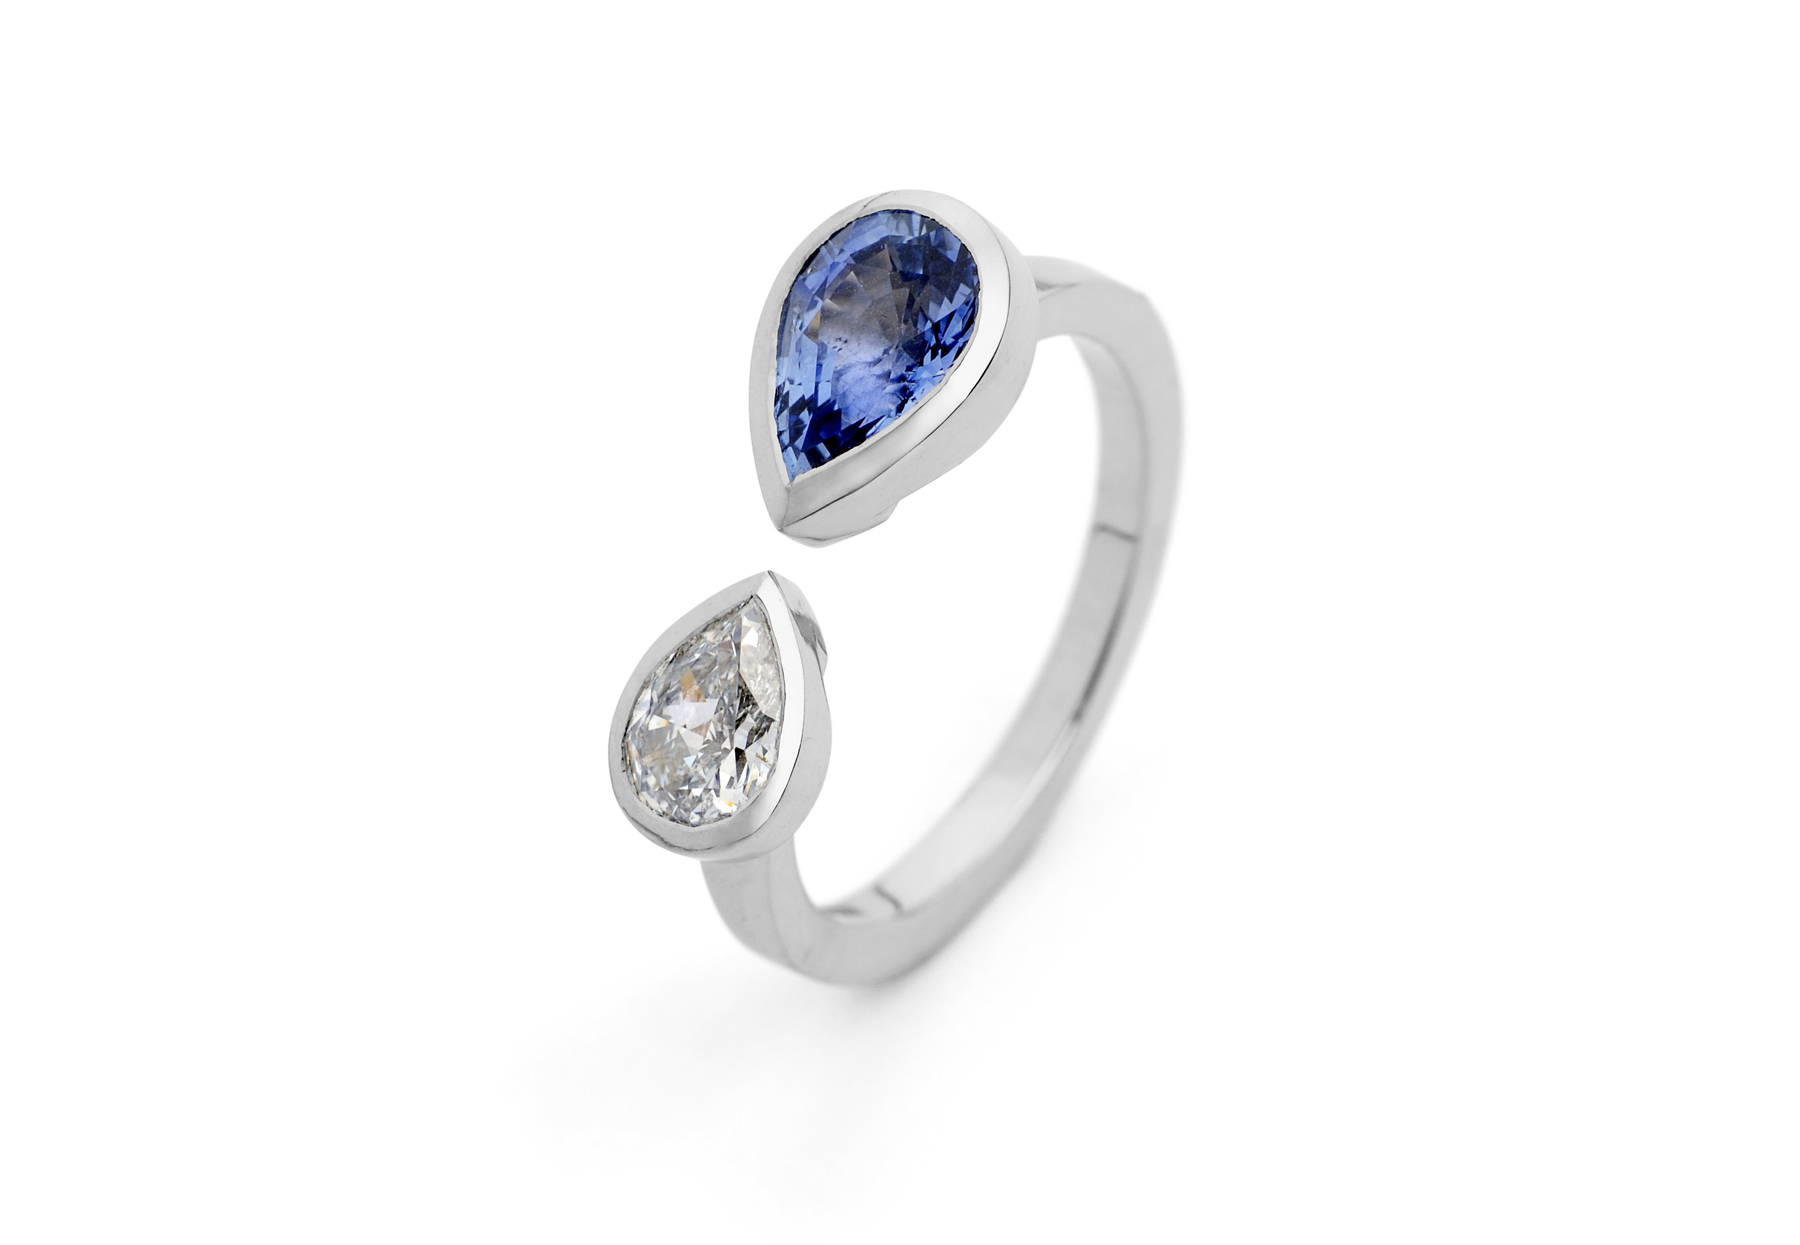 Platinum two stone horseshoe engagement ring with pear diamond and sapphire